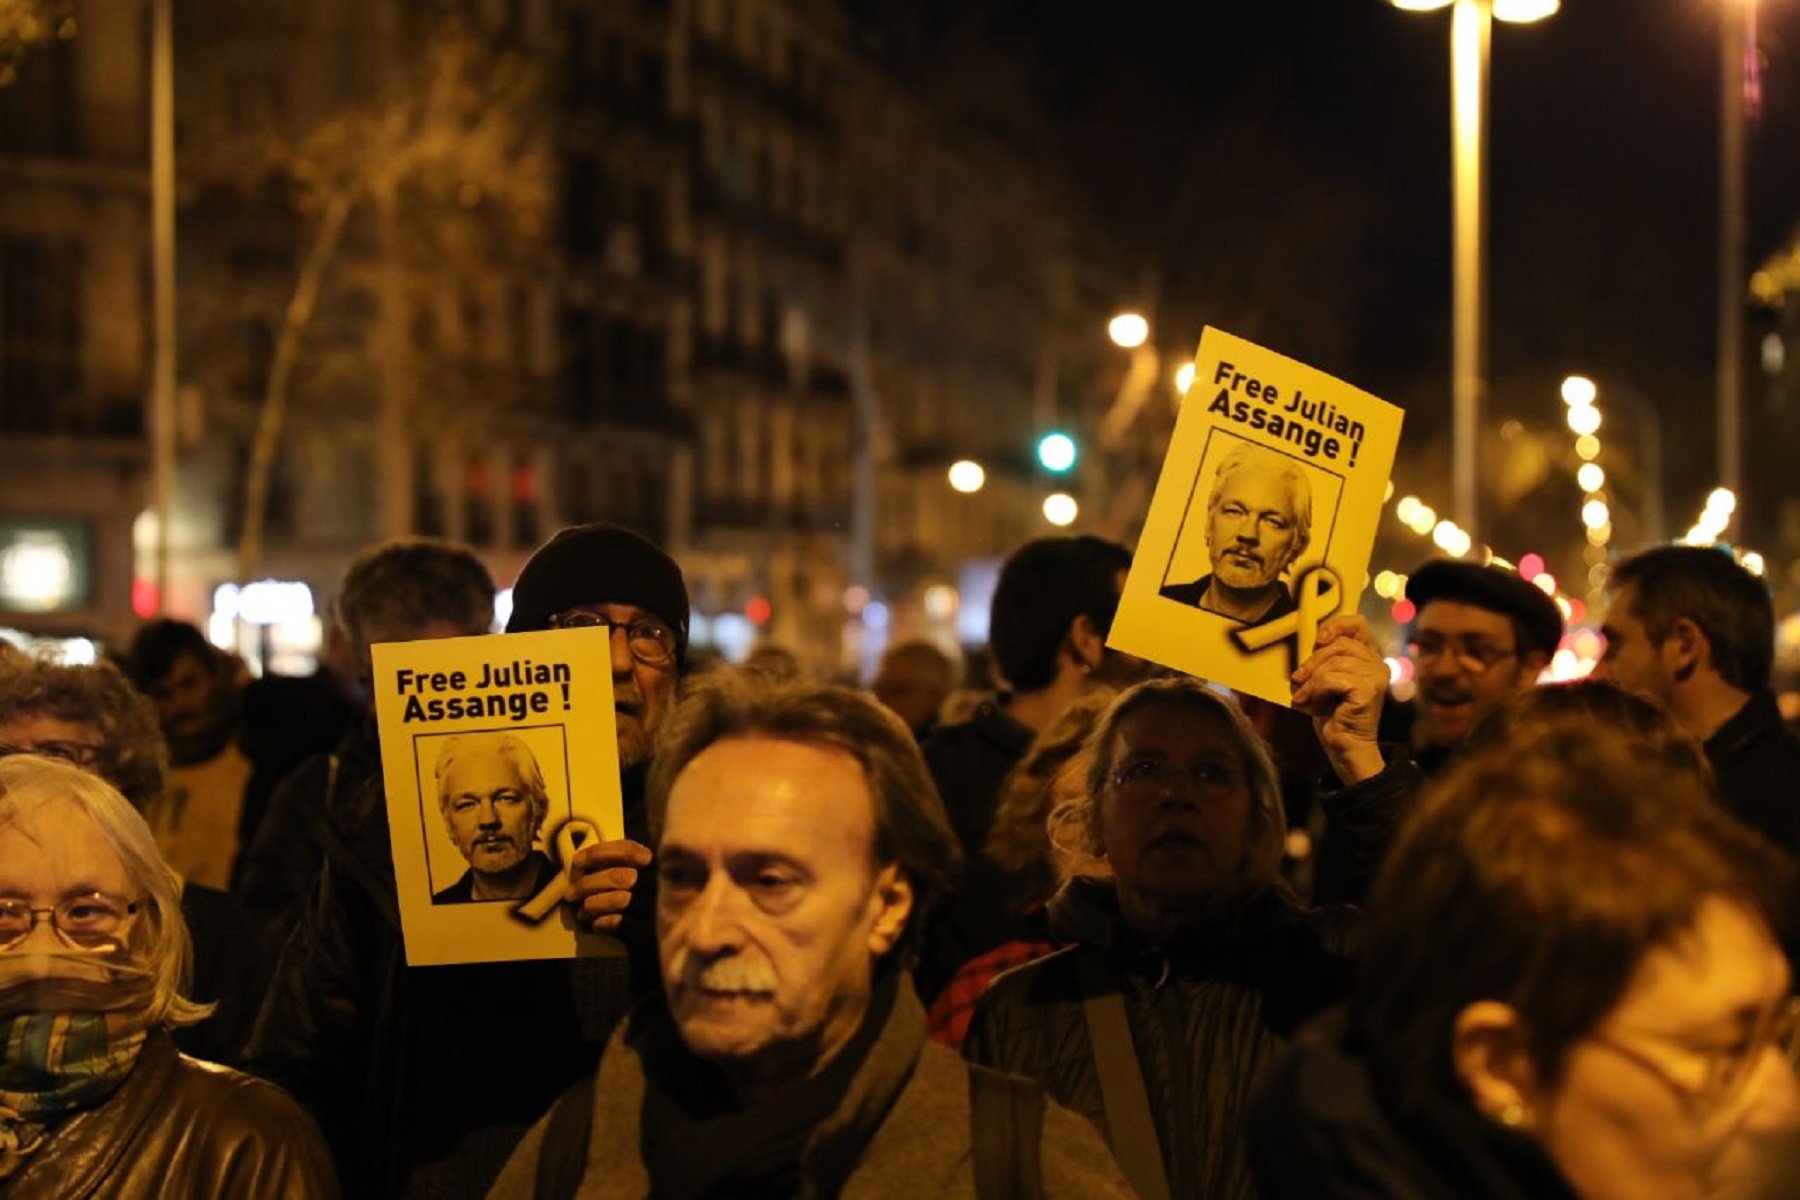 Catalan pro-independence groups march in support of Julian Assange